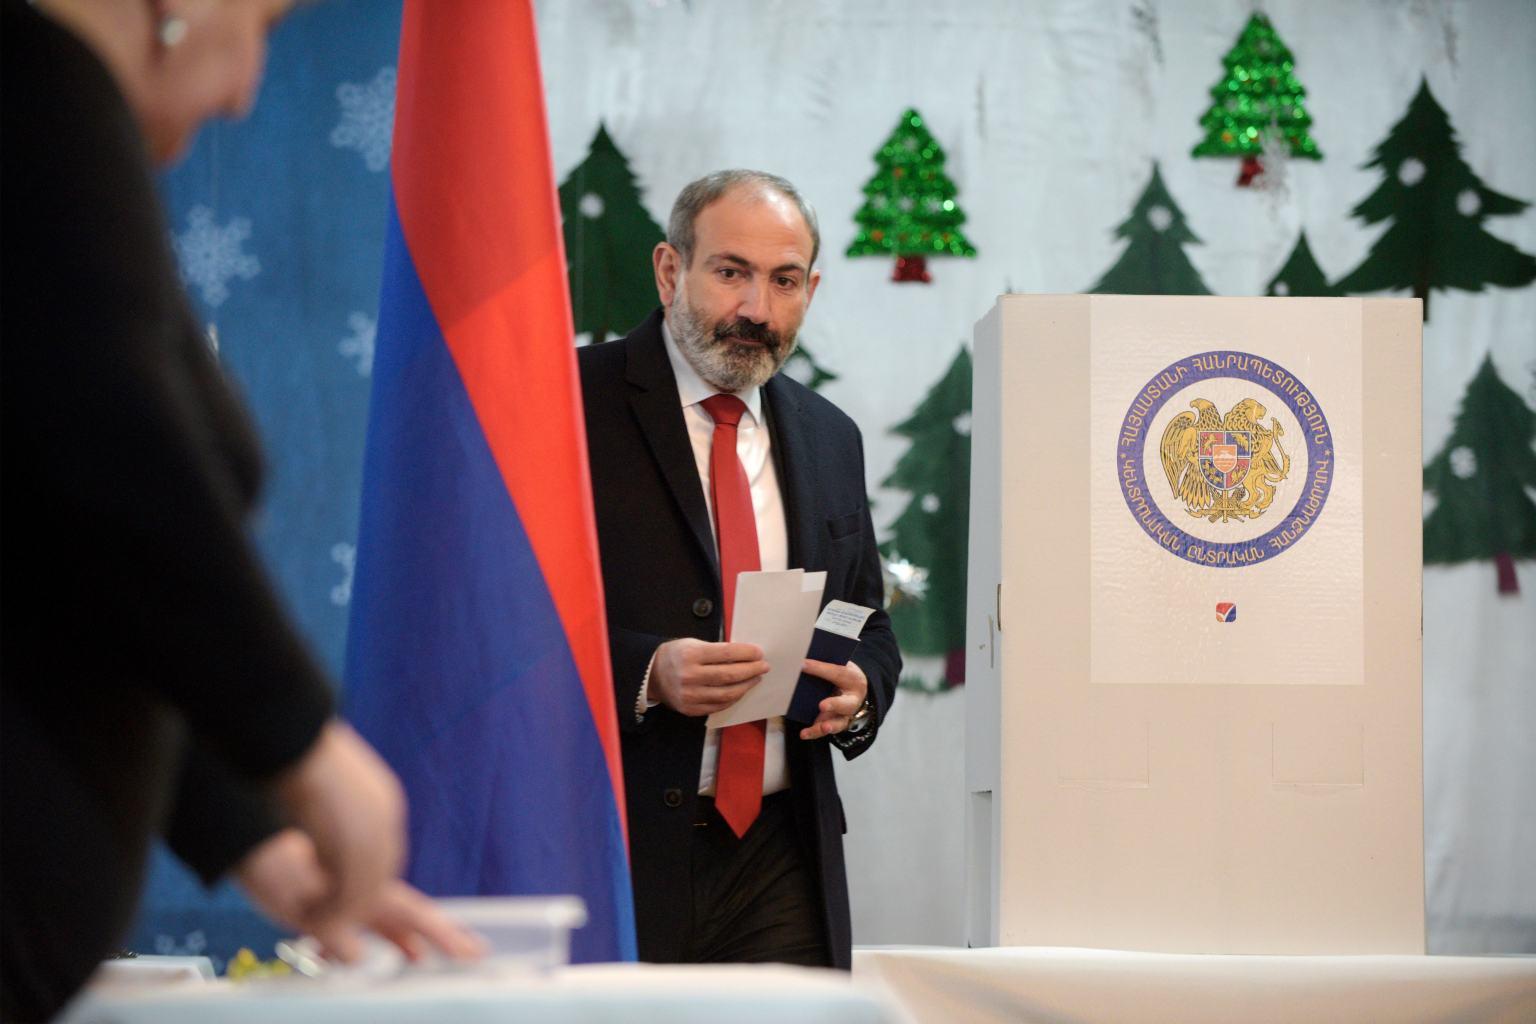 Pashinyan wins the elections in Armenia: What now?